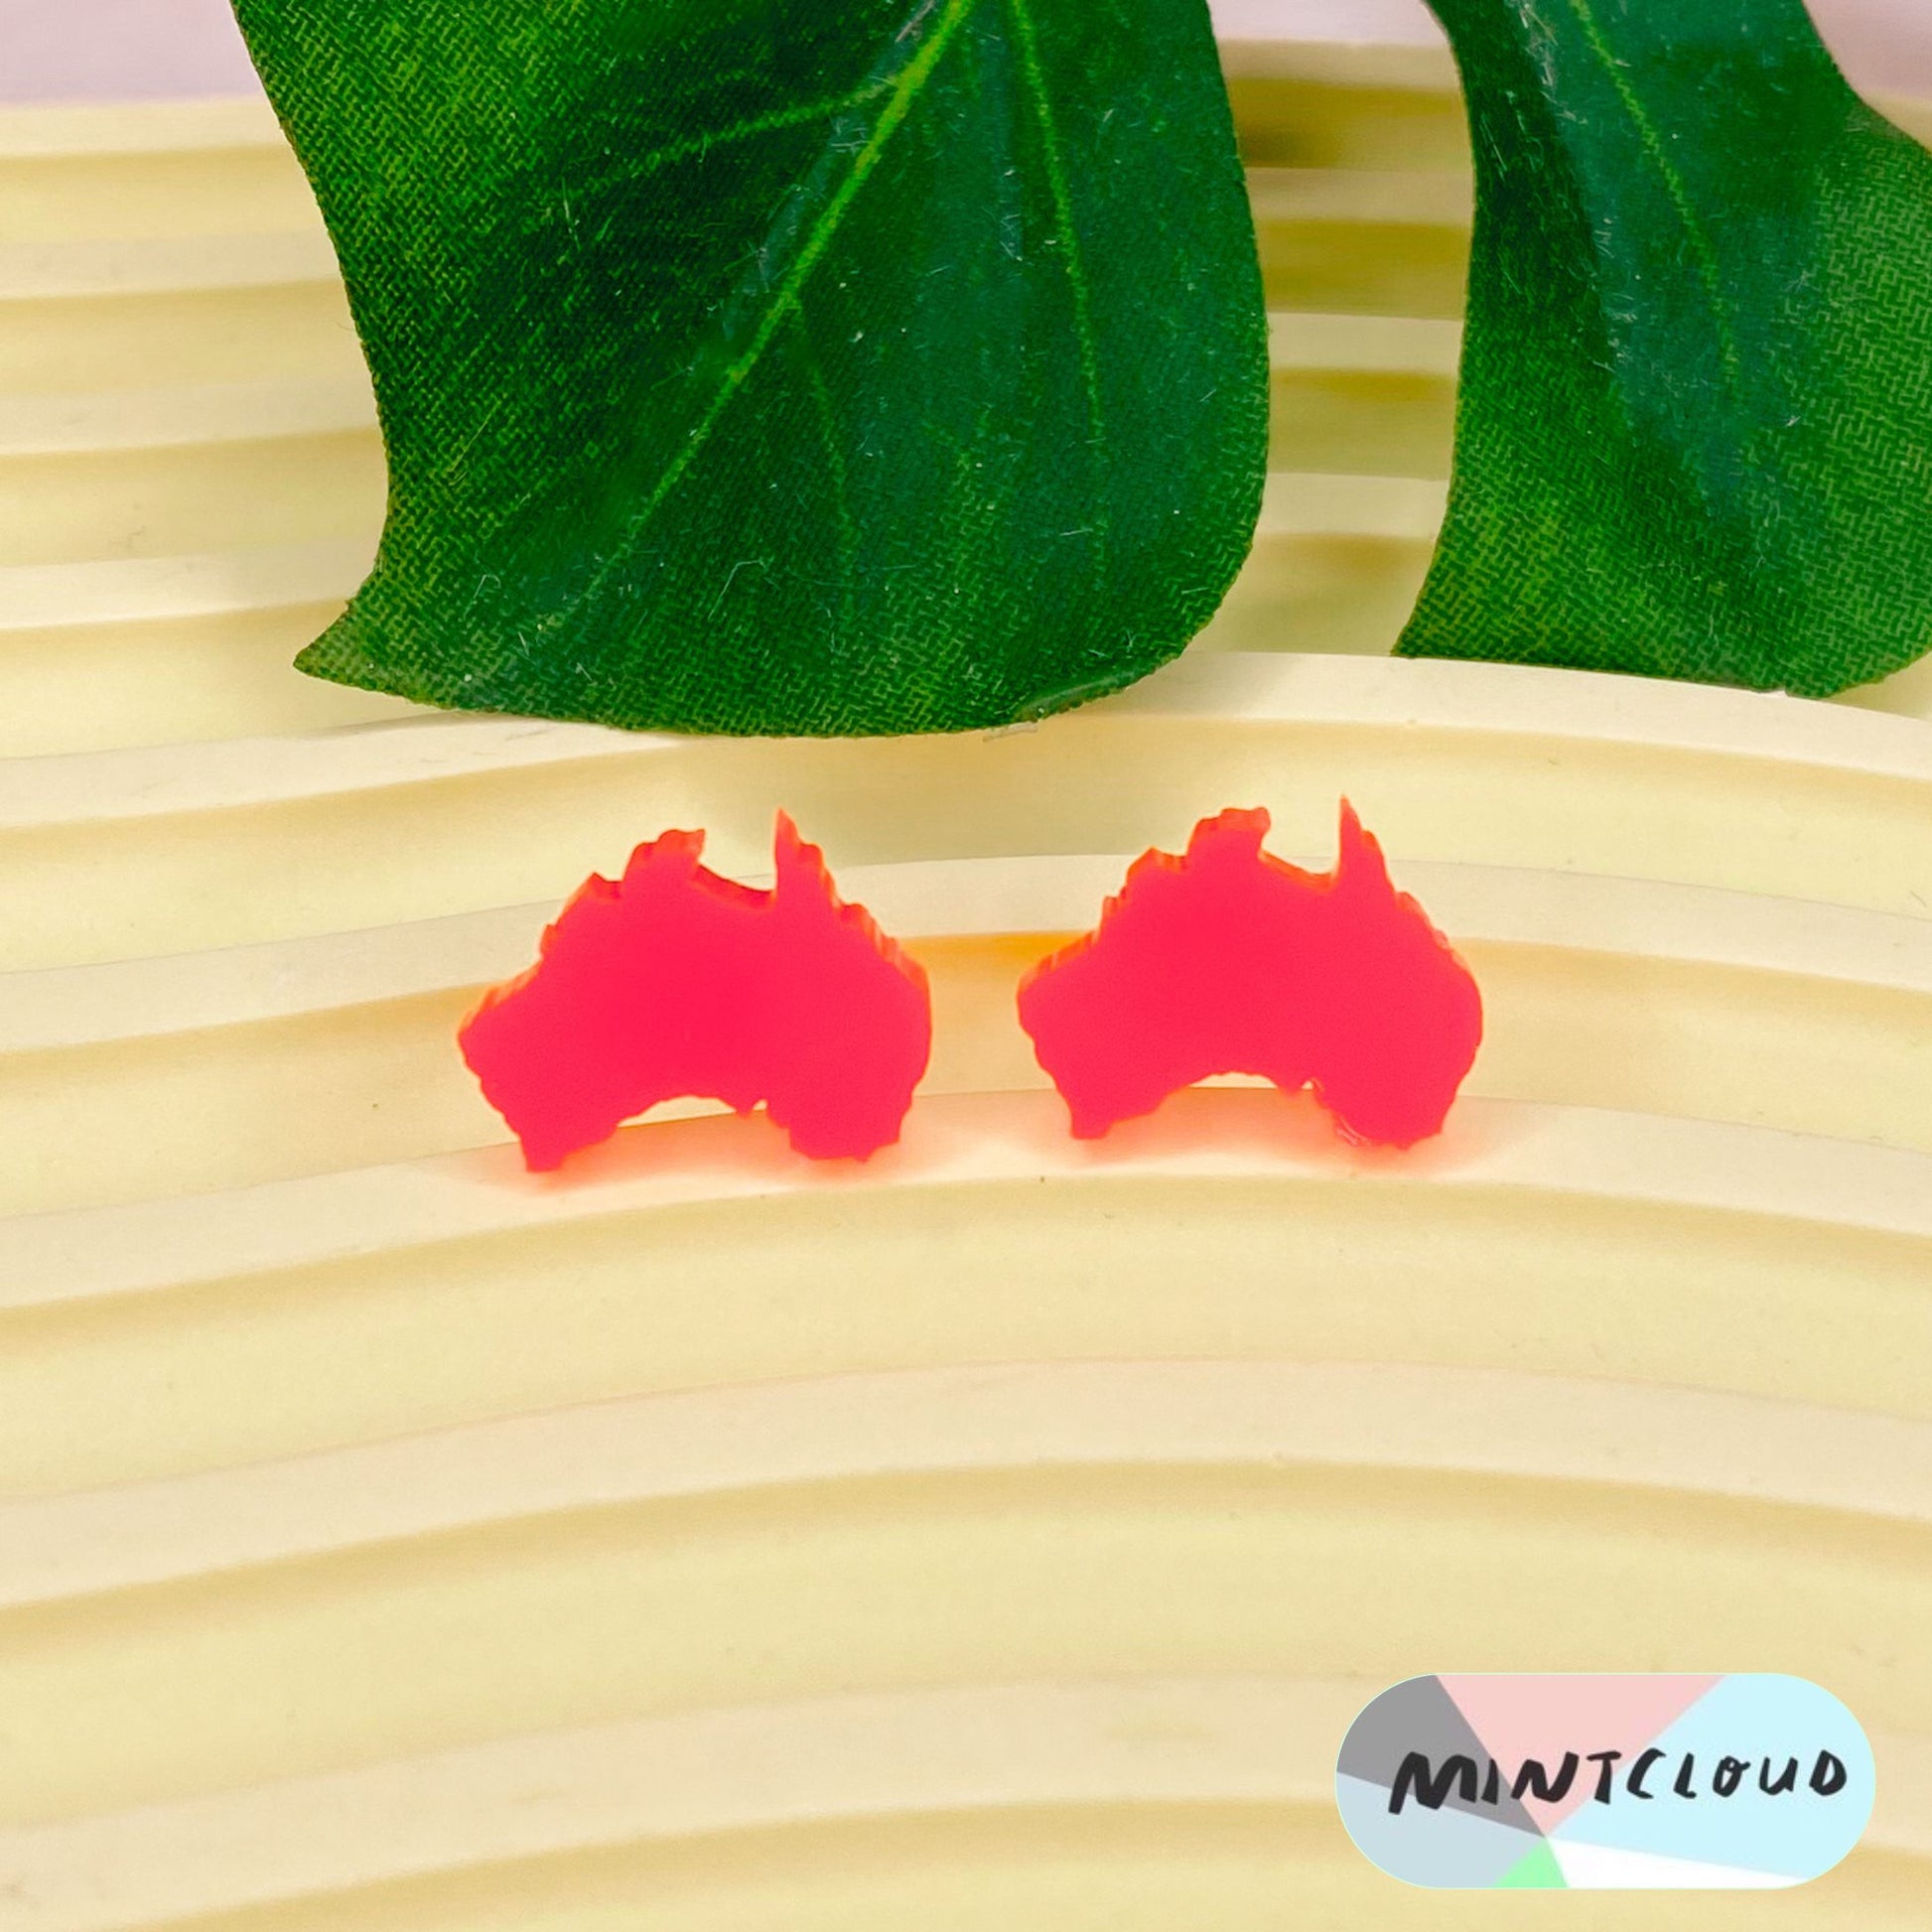 Australiana Studs - Various Designs From Mintcloud Studio, an online jewellery store based in Adelaide South Australia